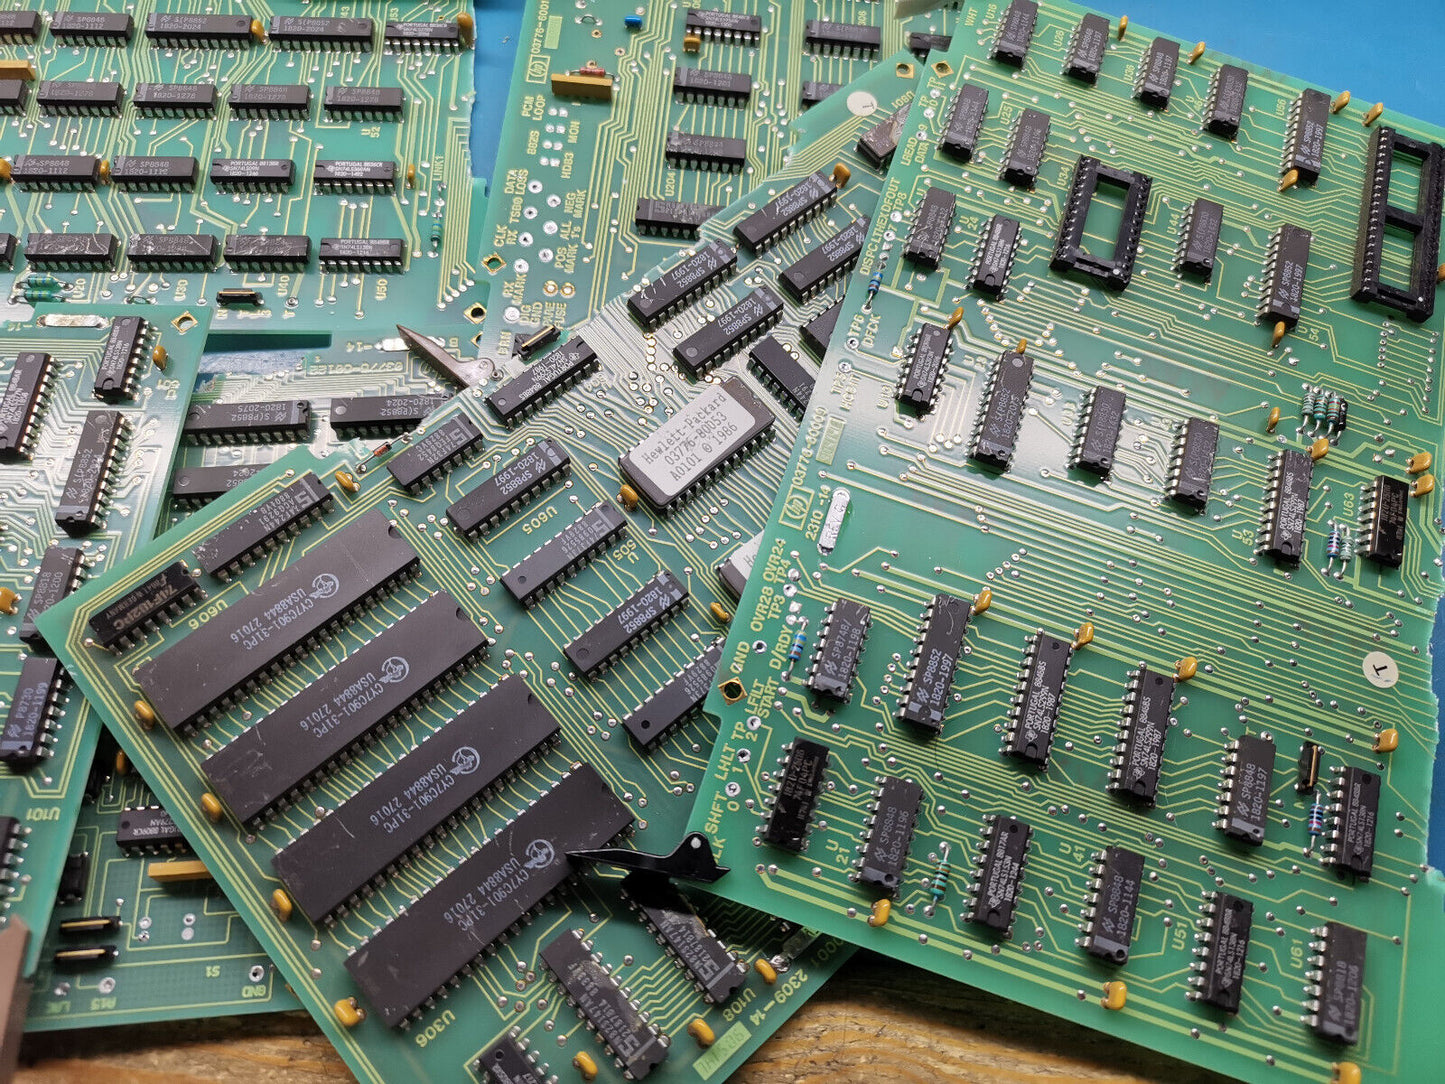 PCB Joblot From HP Agilent Electronic Test Gear